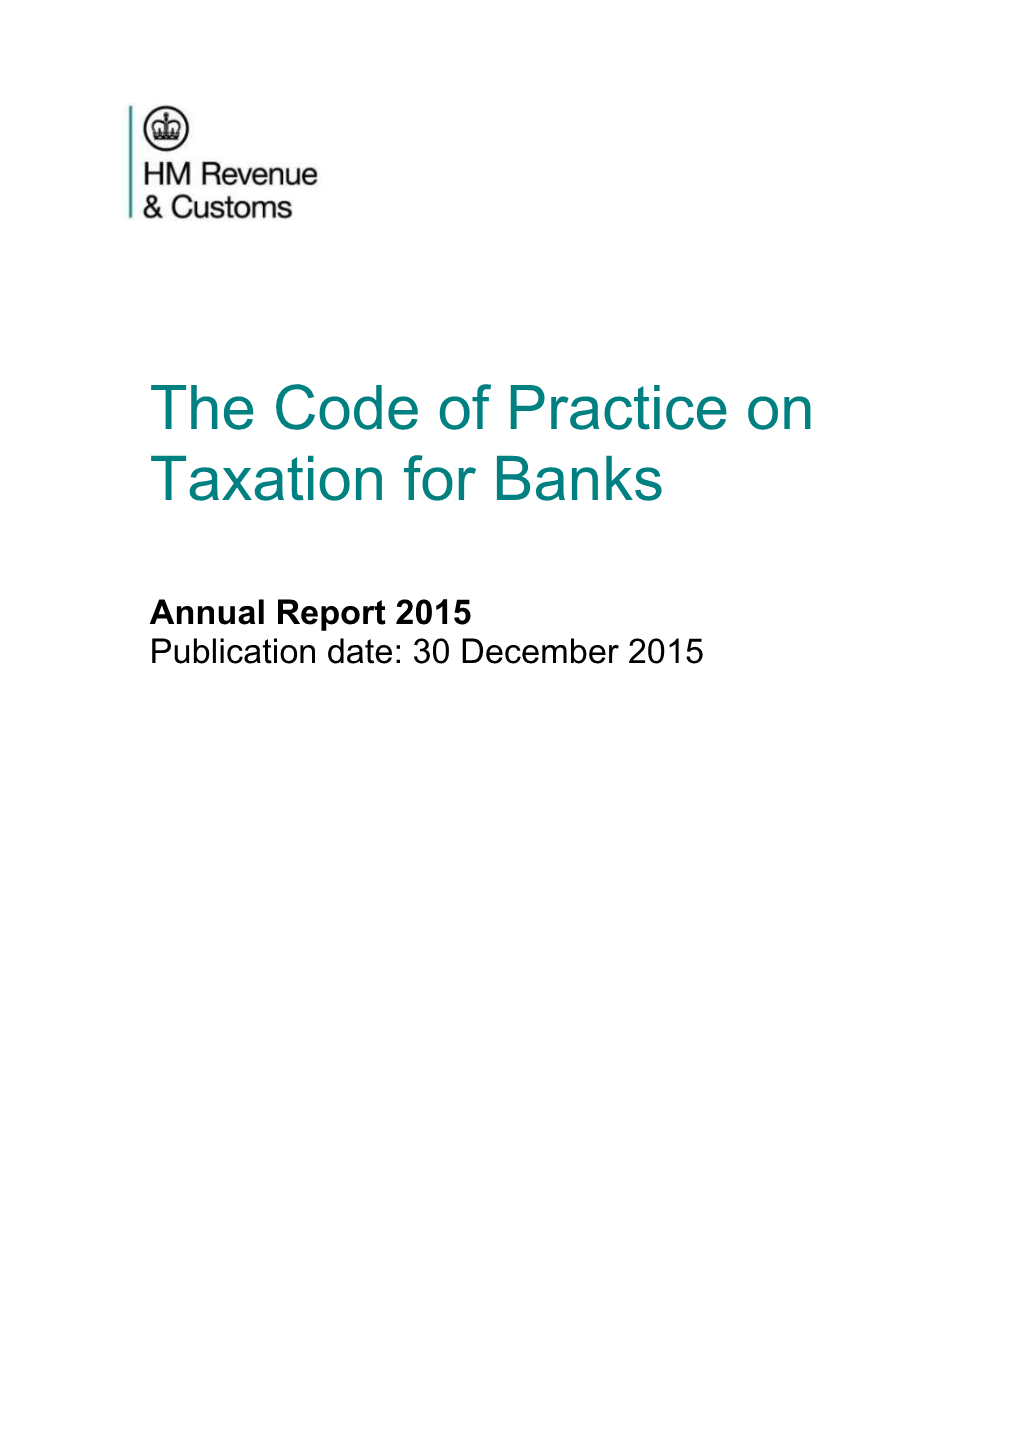 The Code of Practice on Taxation for Banks